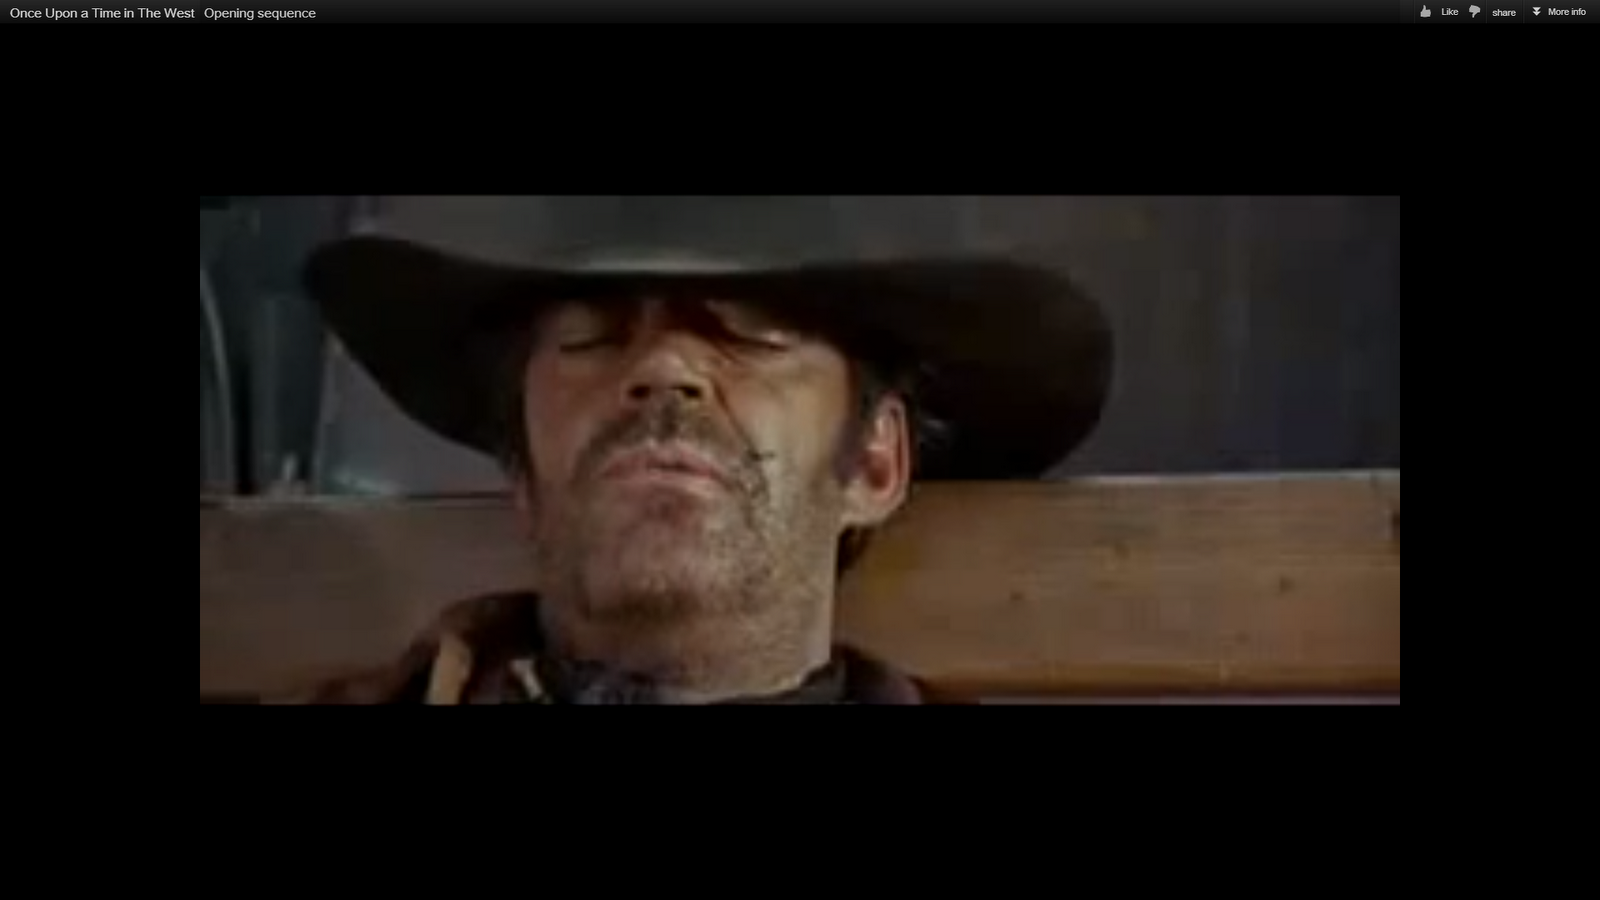 Reel Witty: Once Upon a Time in The West (1968) Opening Scene Analysis